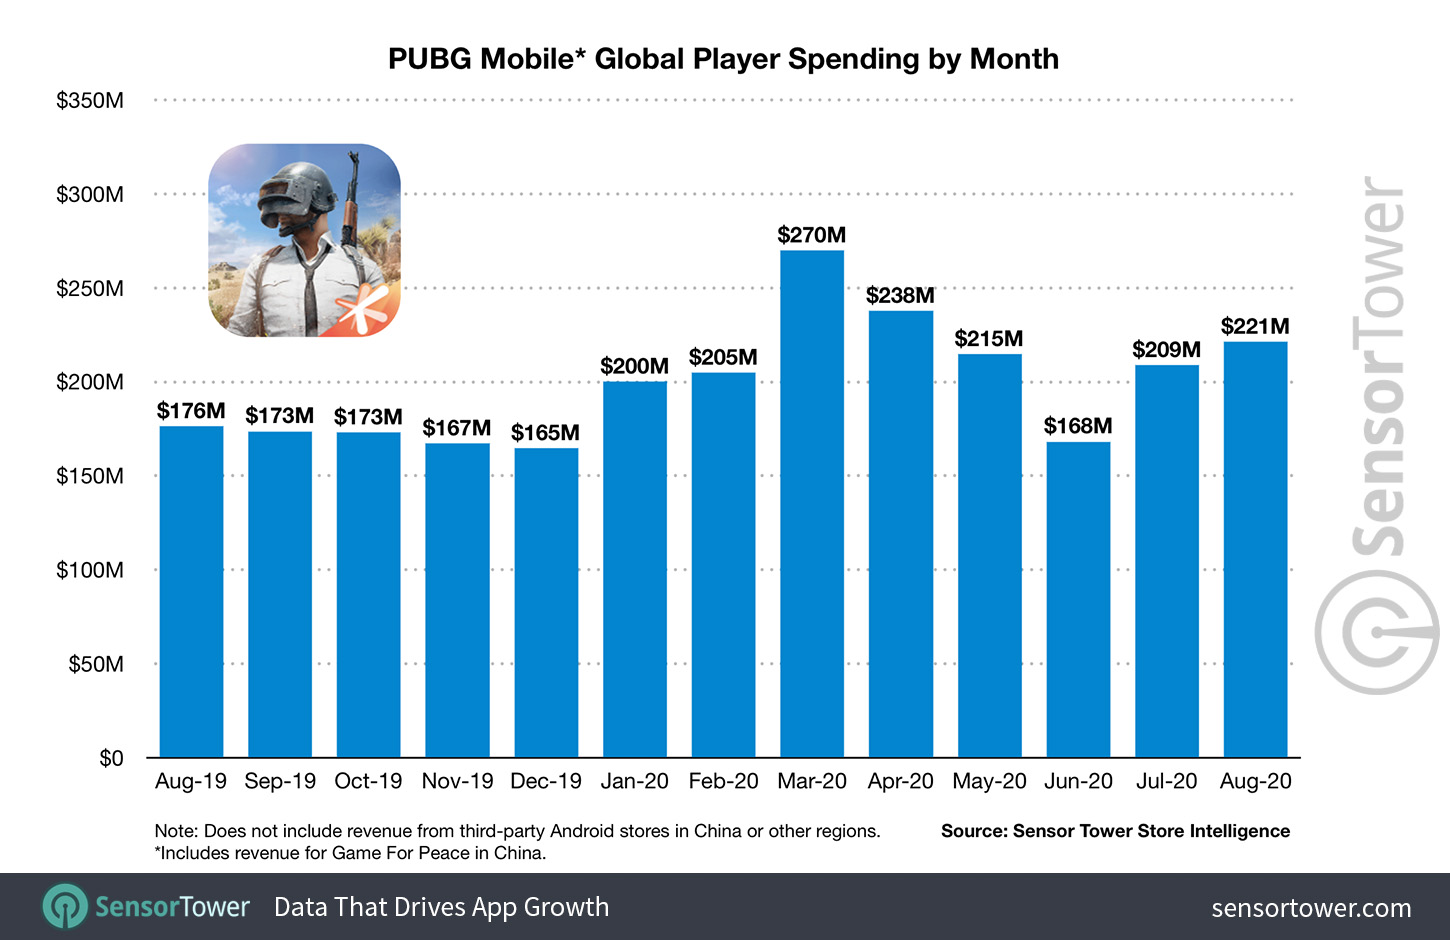 pubg-mobile-global-player-spending-by-month-jan-to-aug-2020.jpg